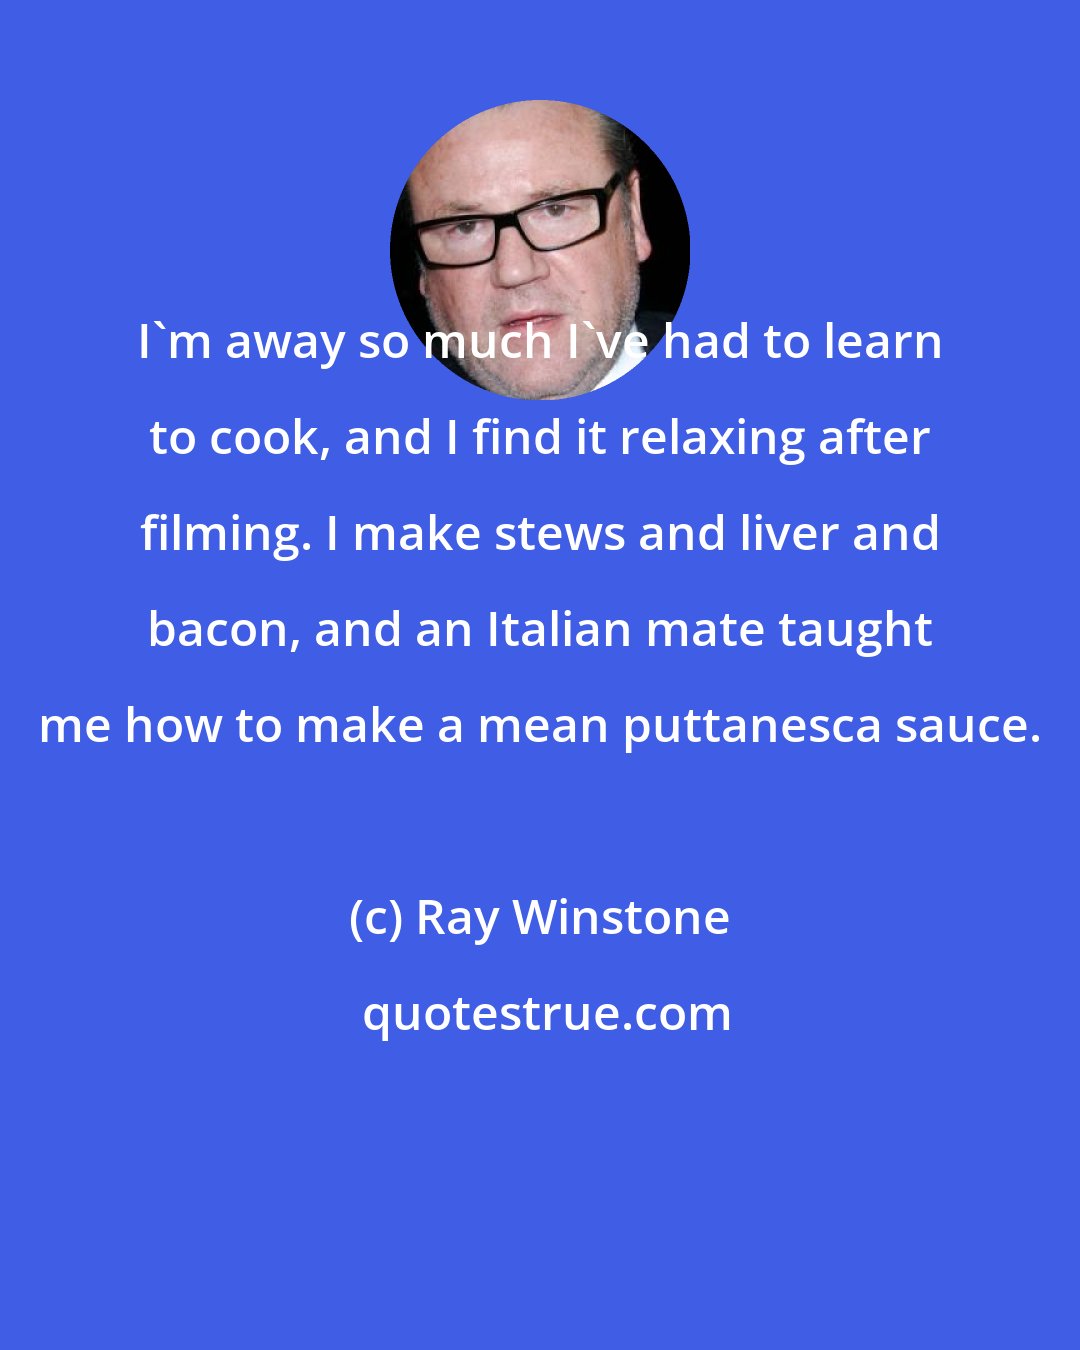 Ray Winstone: I'm away so much I've had to learn to cook, and I find it relaxing after filming. I make stews and liver and bacon, and an Italian mate taught me how to make a mean puttanesca sauce.